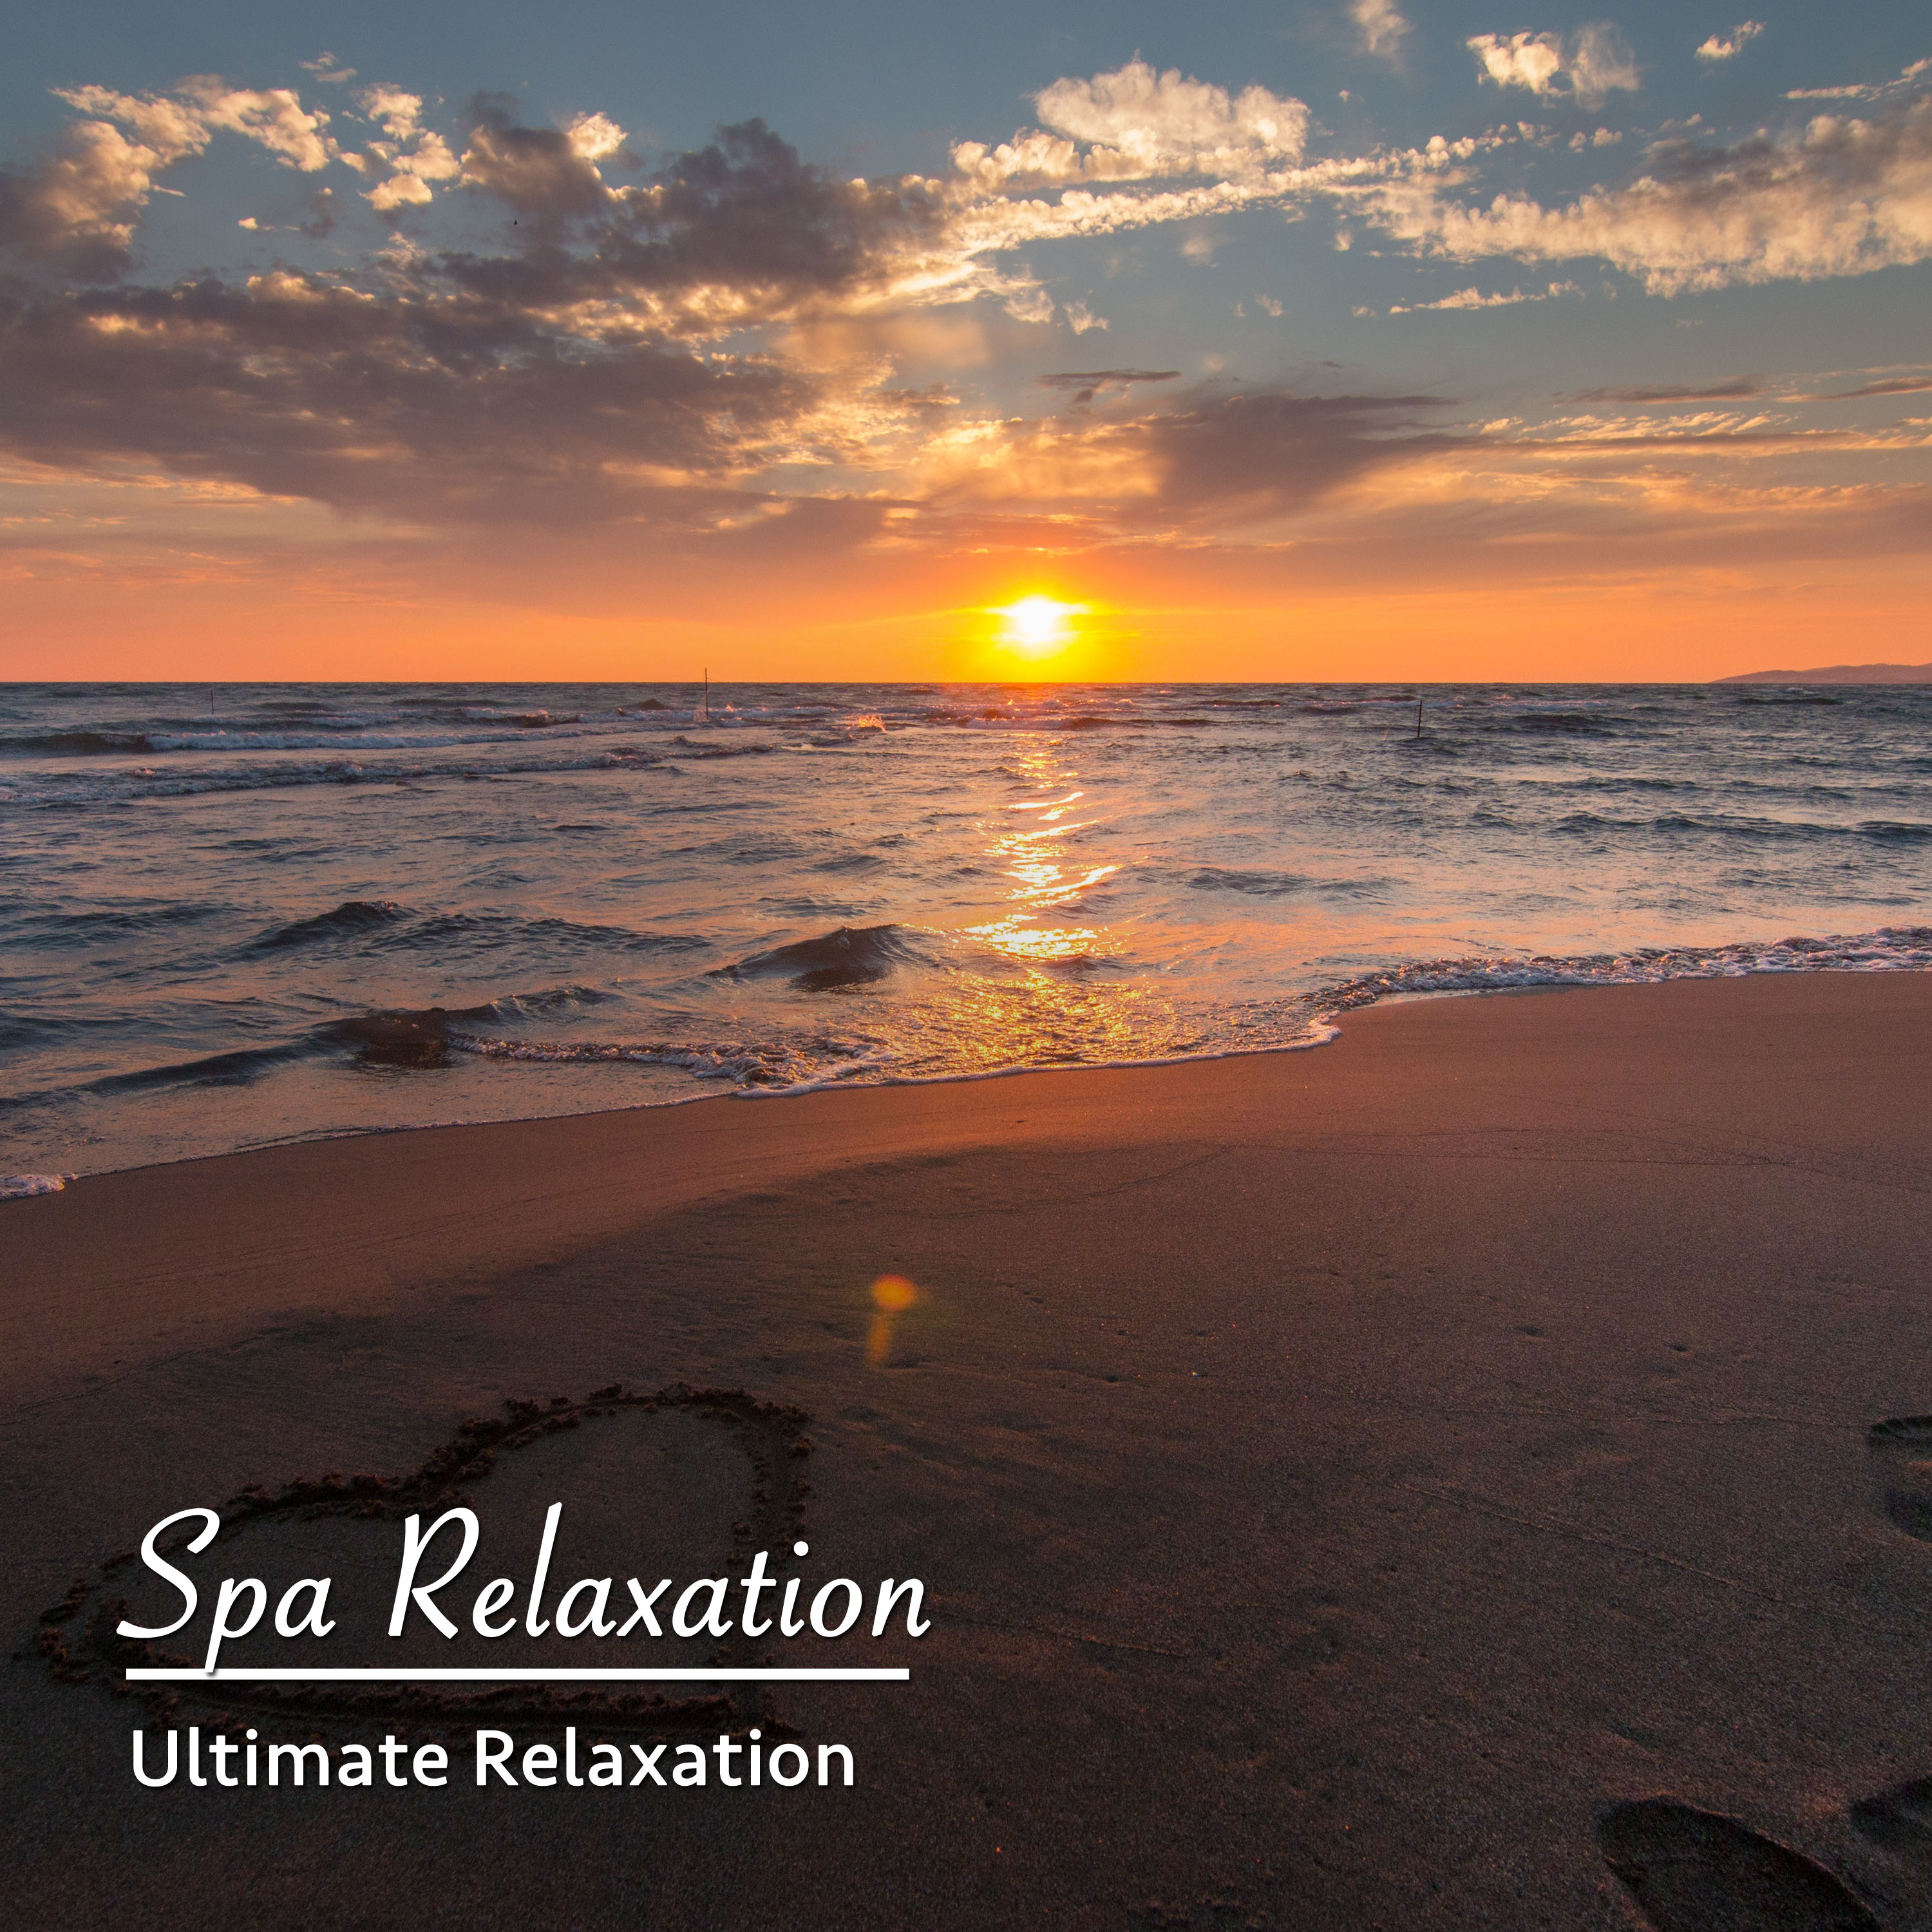 13 Spa Relaxation Songs for Ultimate Relaxation